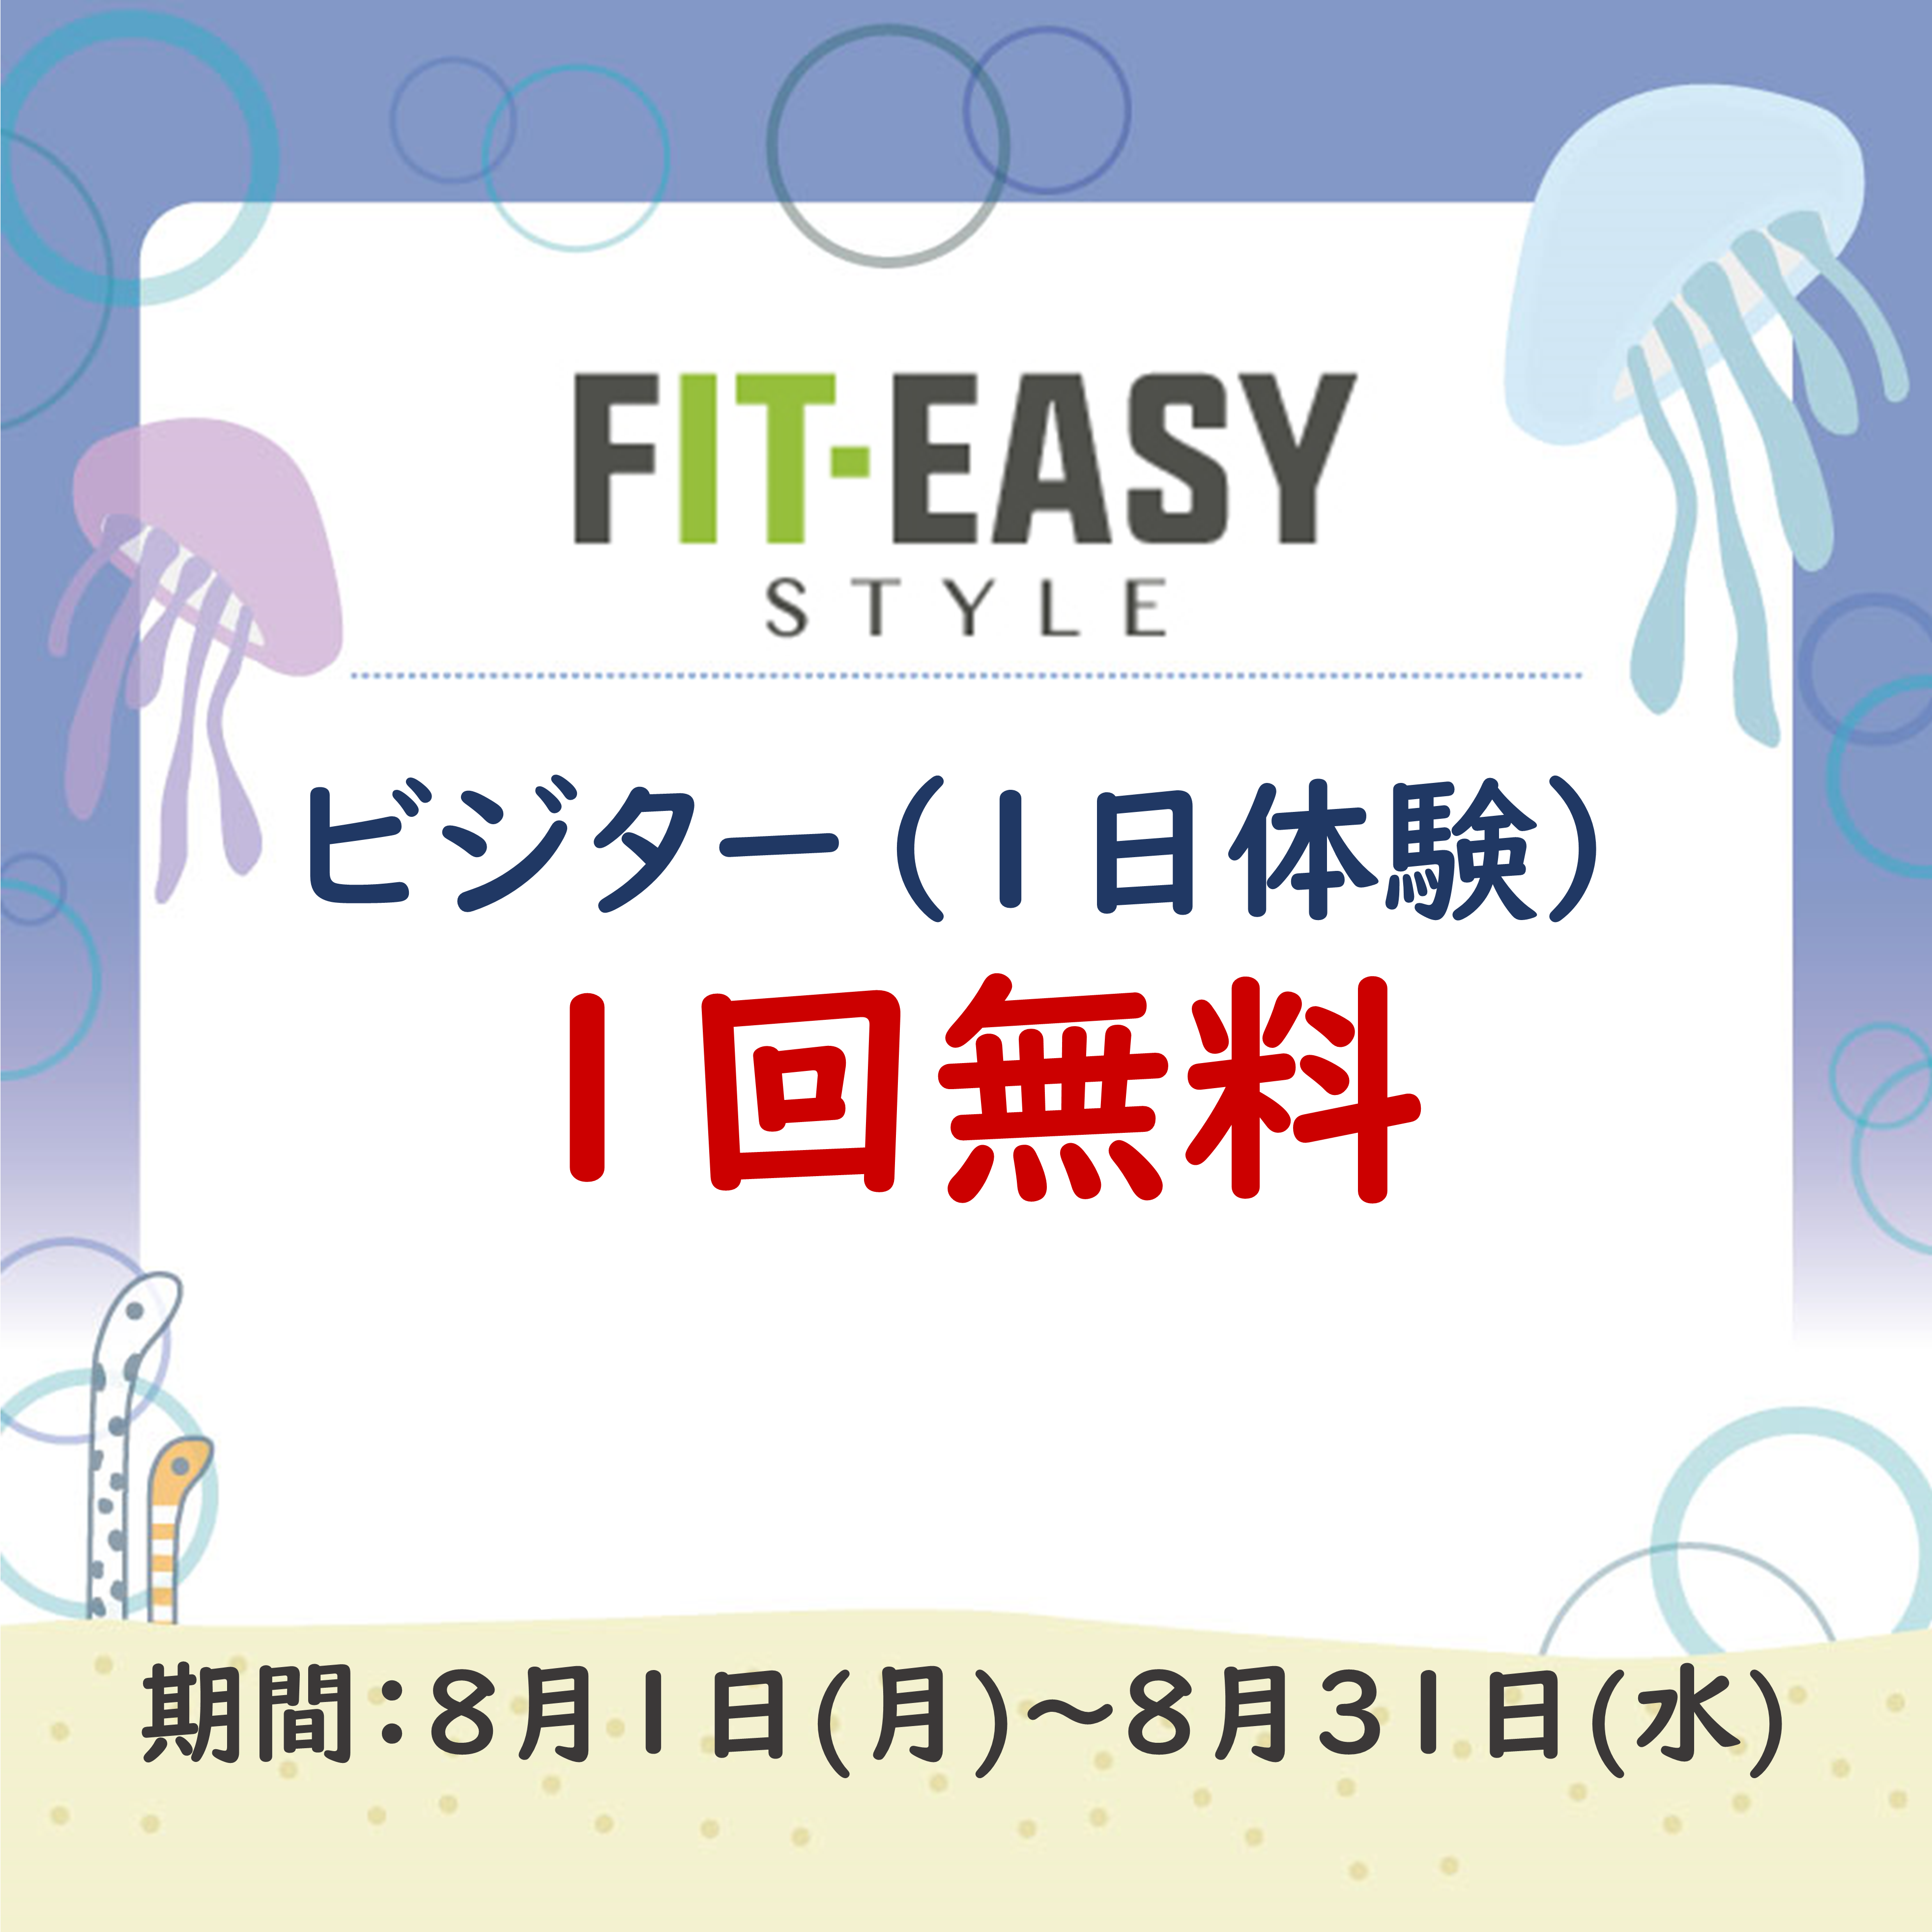 1_FIT-EASY.PNG